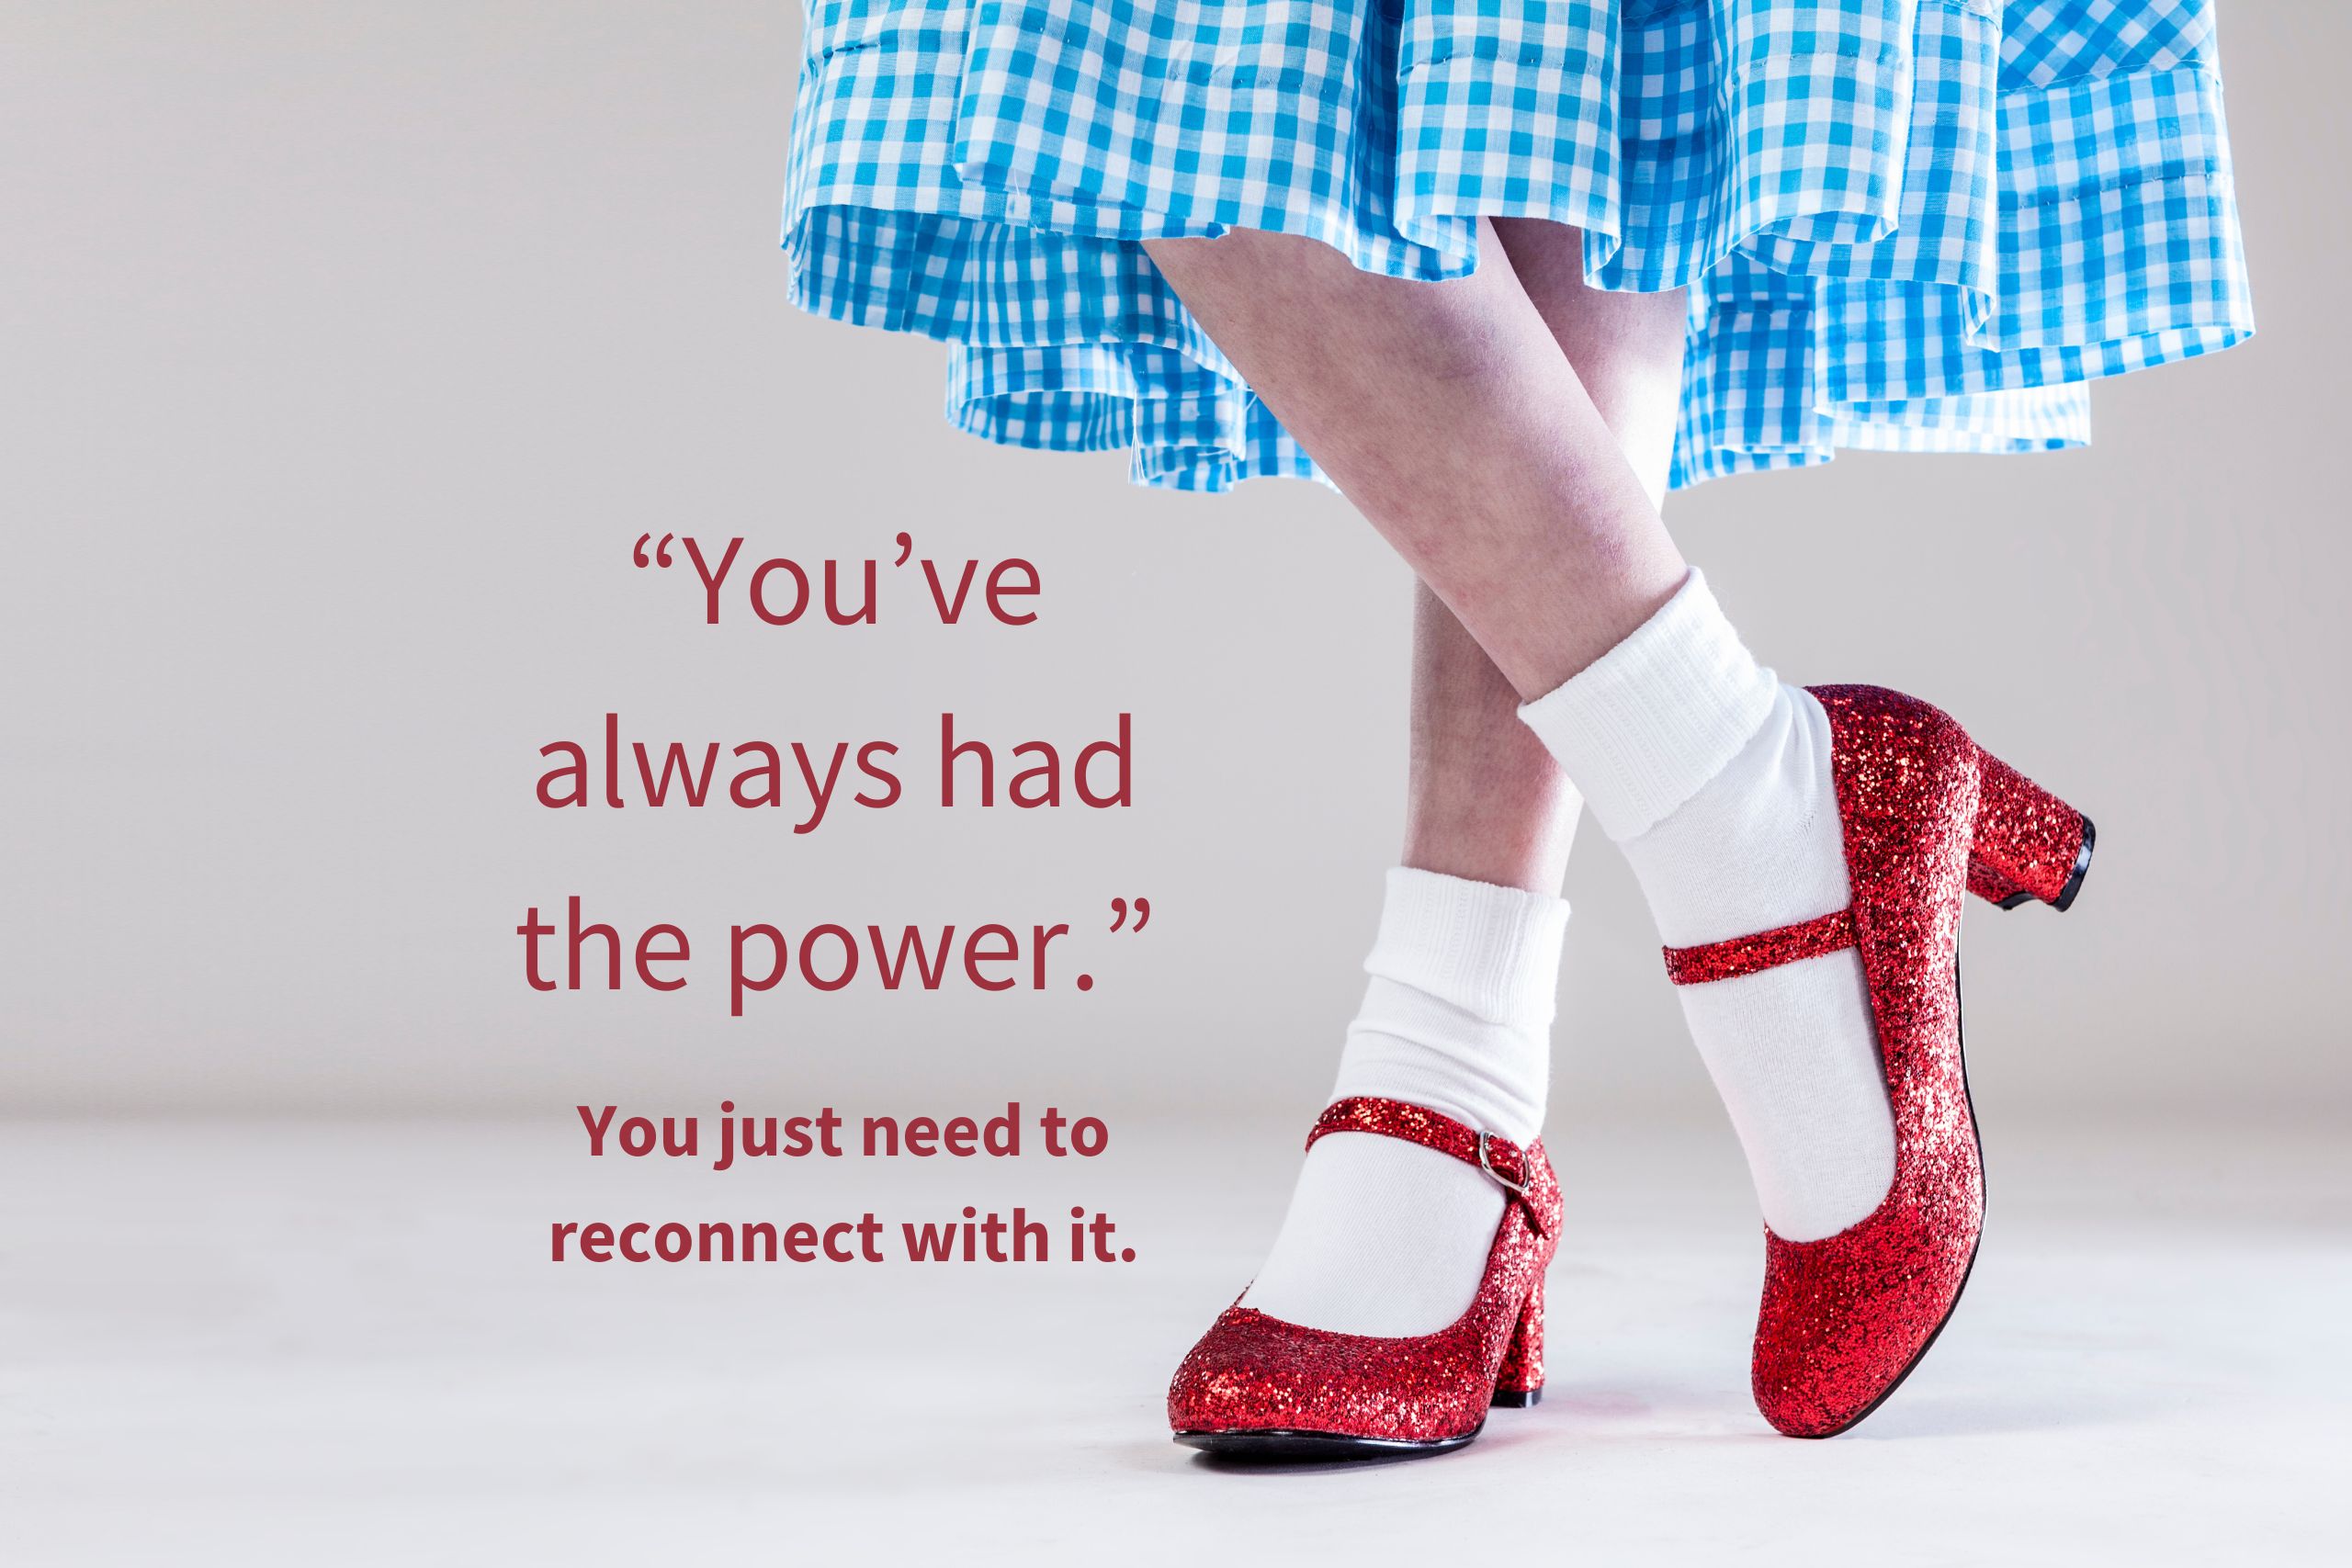 Picture of Dorothy's ruby slippers and blue gingham dress from the Wizard of Oz with the words: You've always had the power. You just need to reconnect with it"